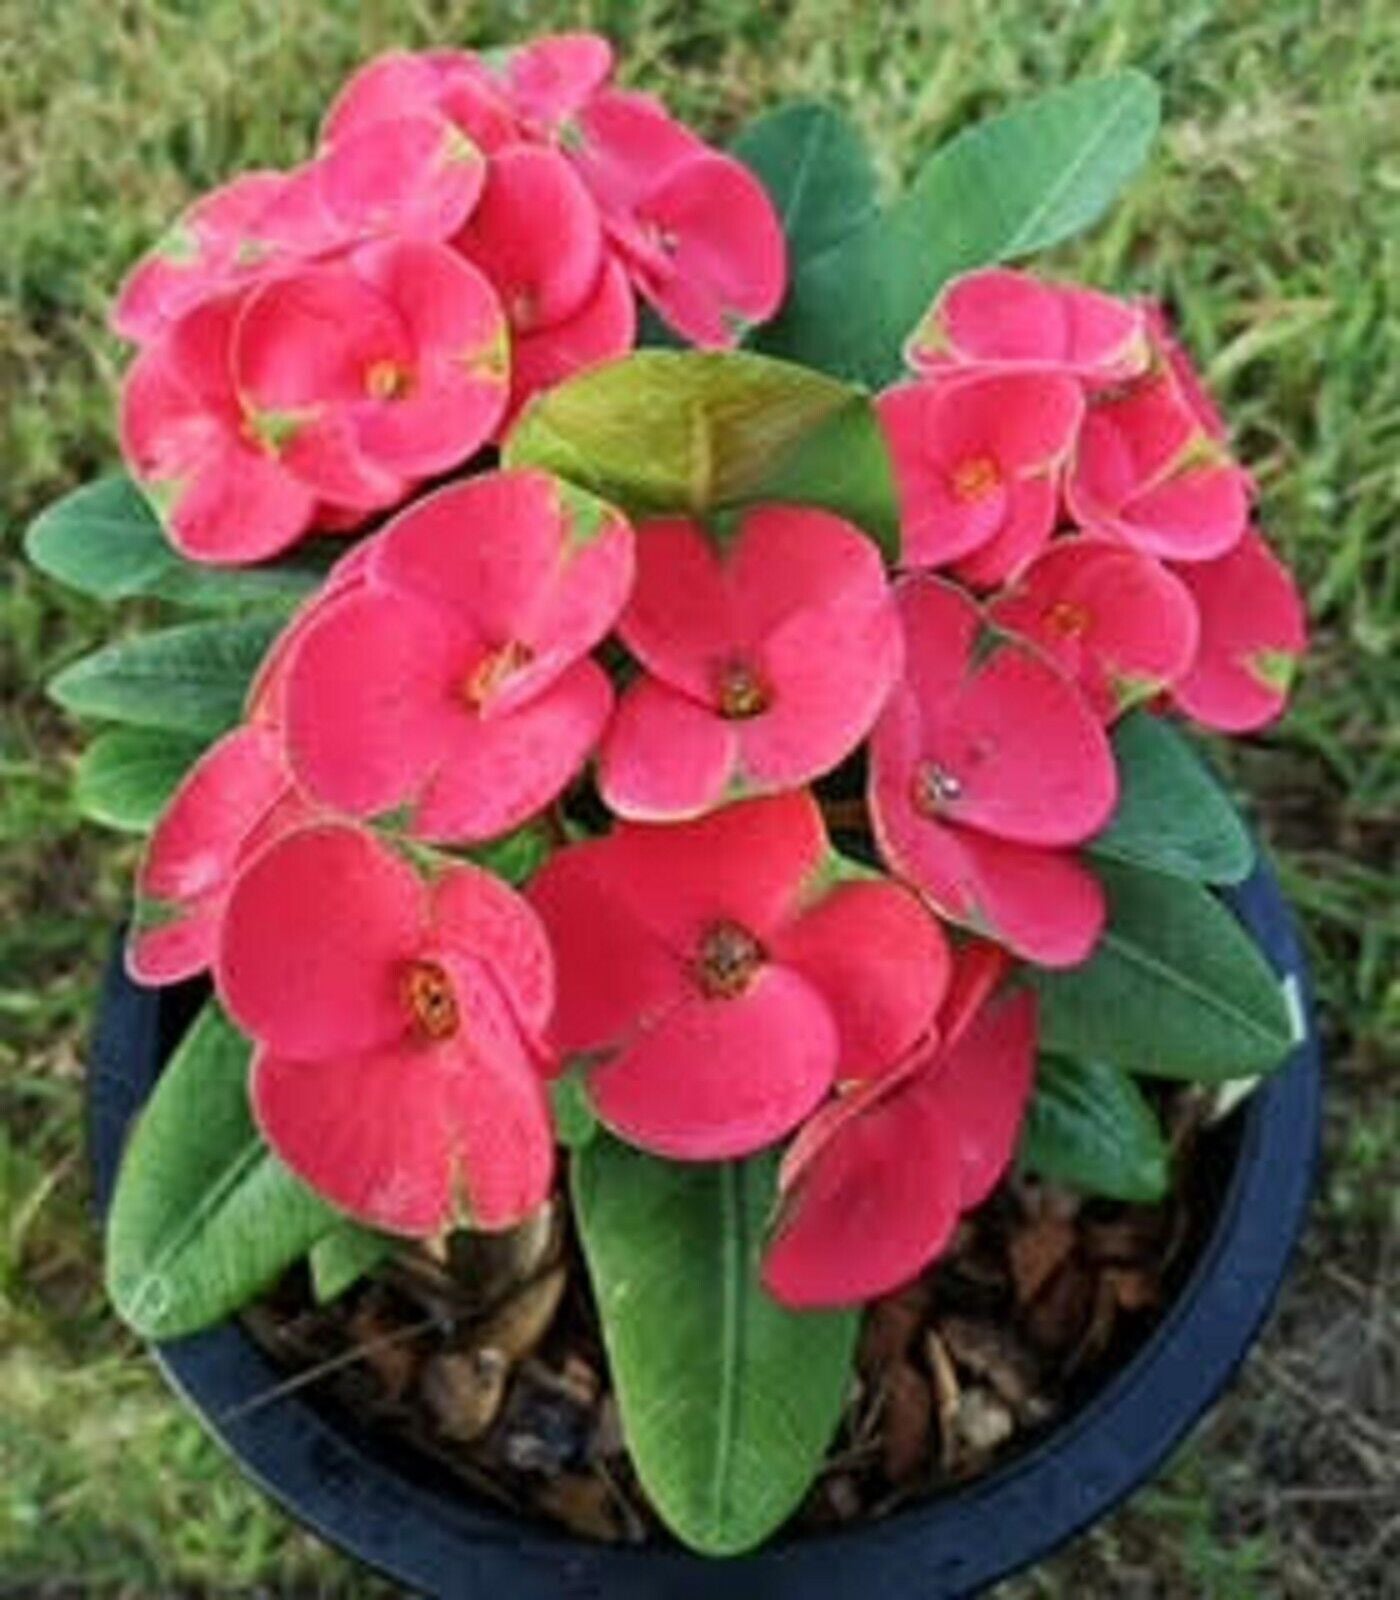 TruBlu Supply One 6 inch + Stem Cutting - Red Crown of Thorns Christ Plant - Euphorbia Milii - Live Succulent Plant, Crownt